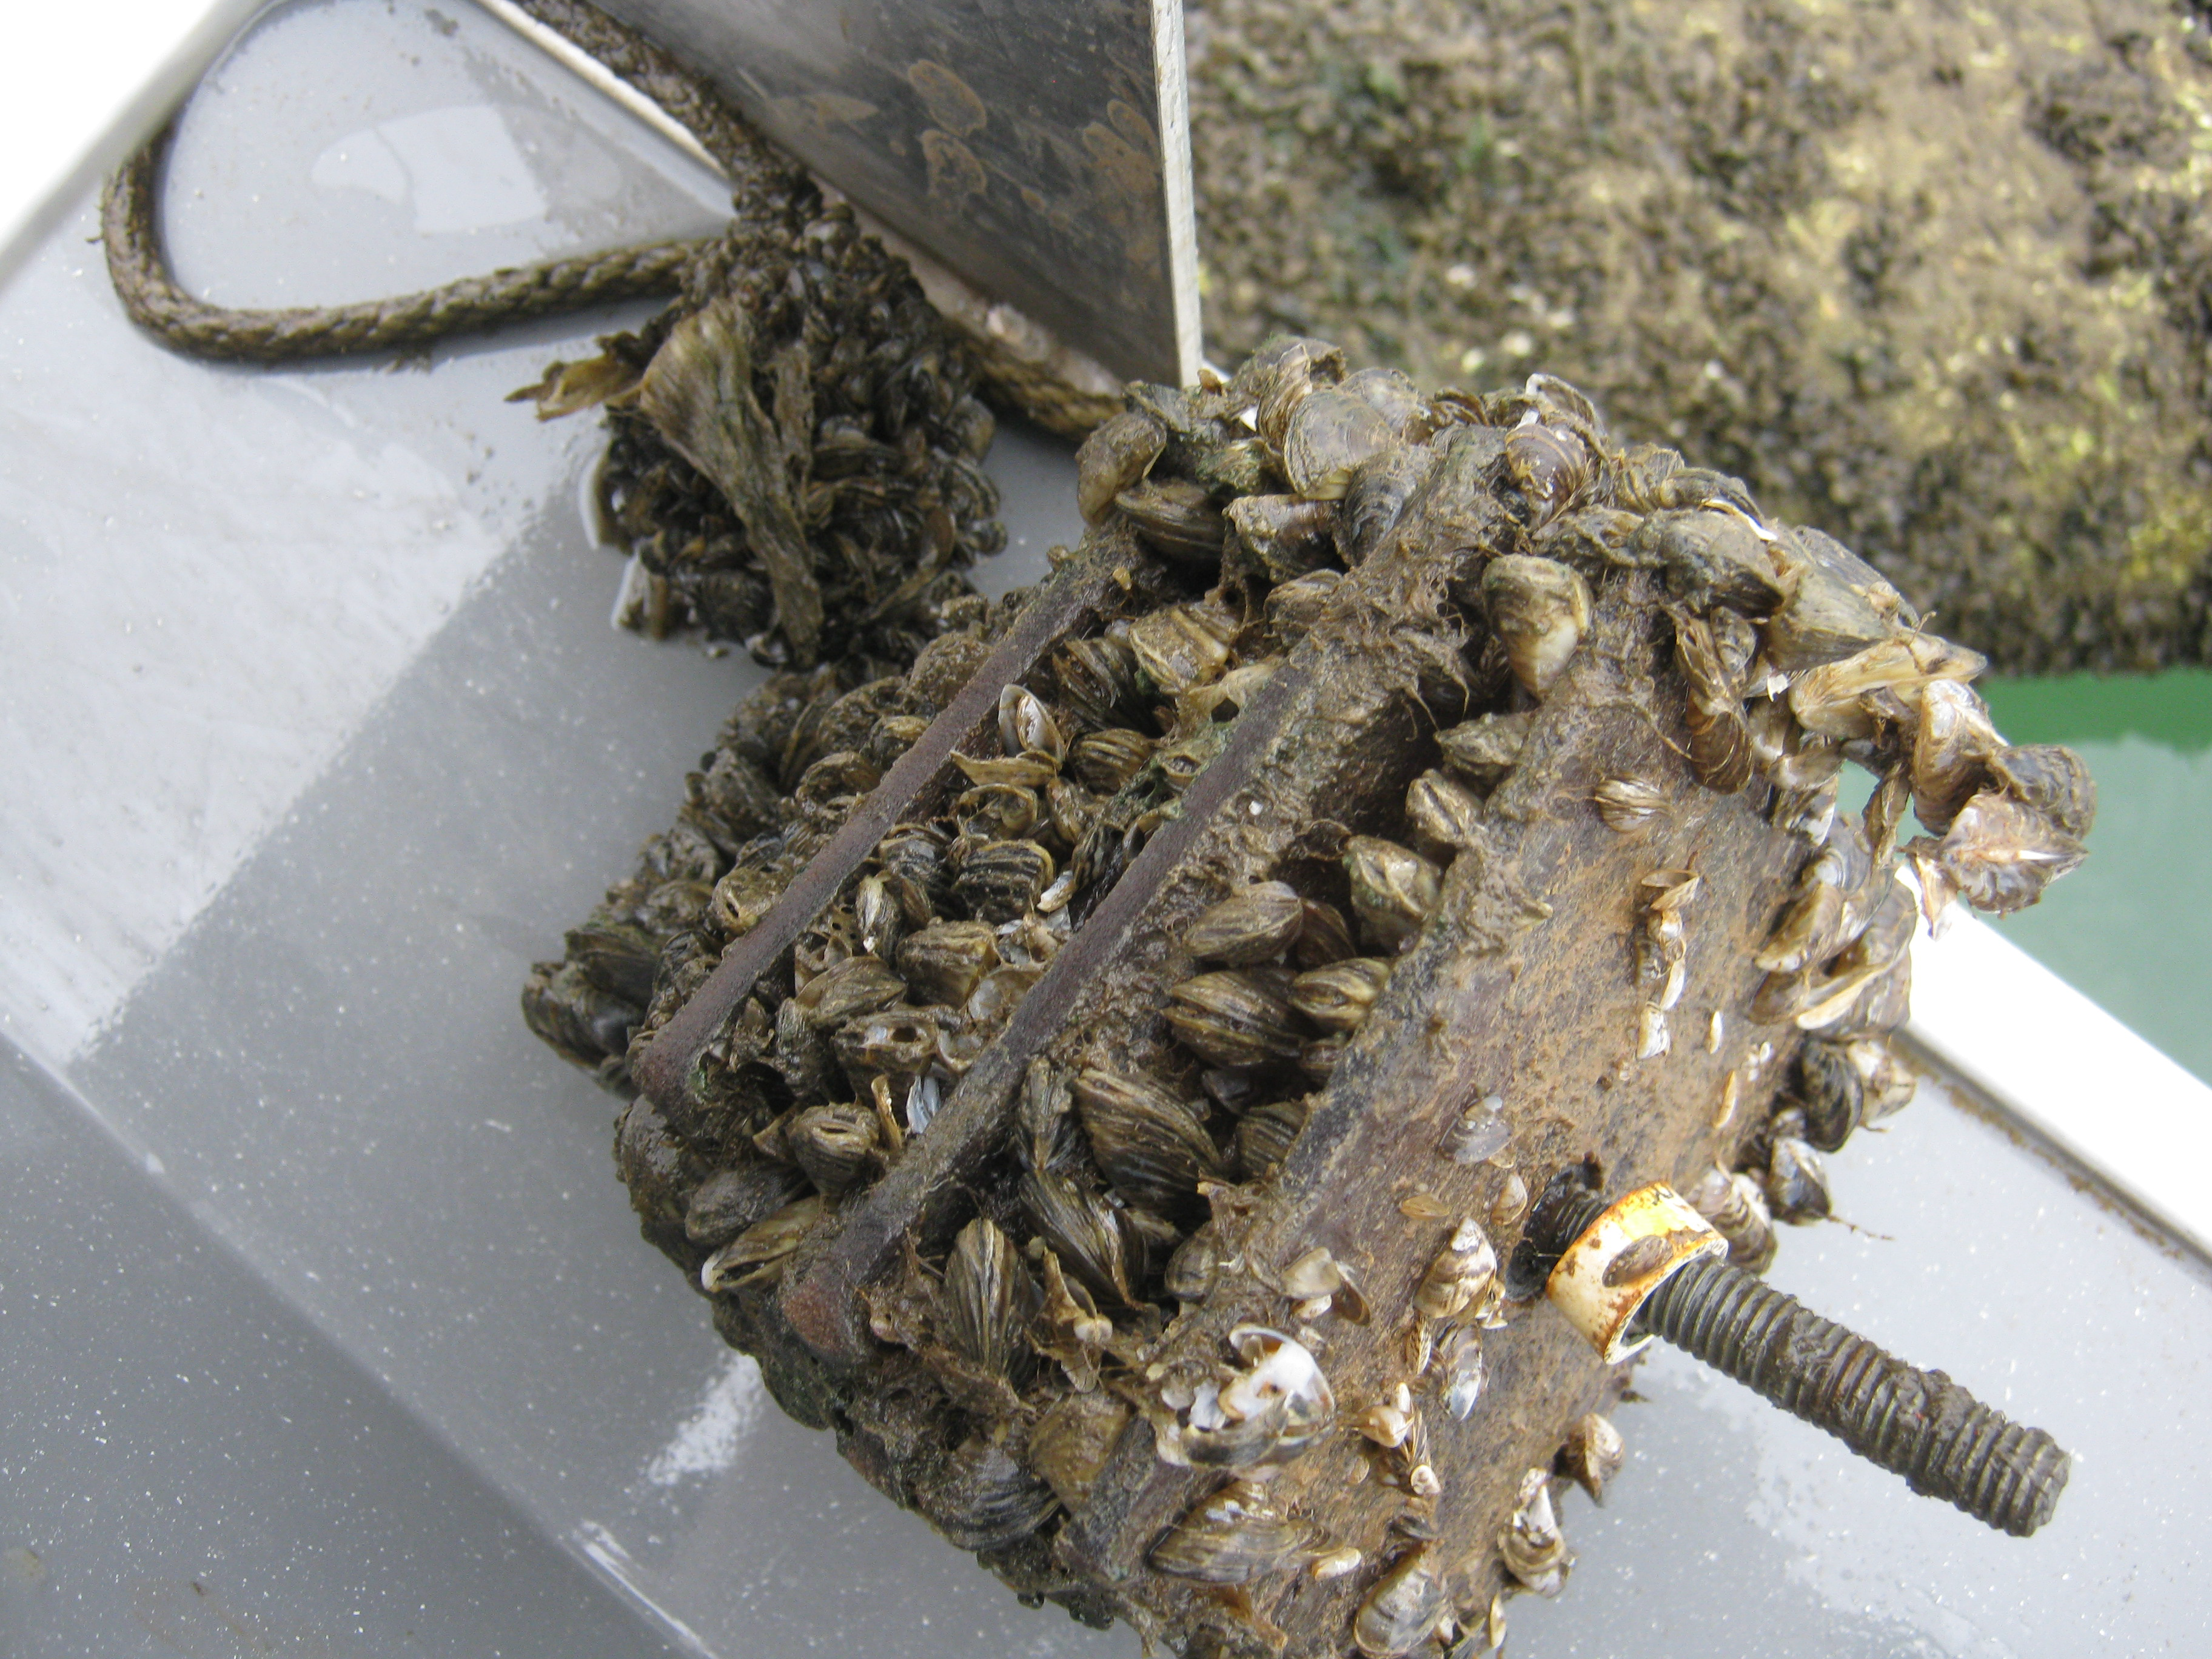 Adult zebra mussels attached to artificial substrate